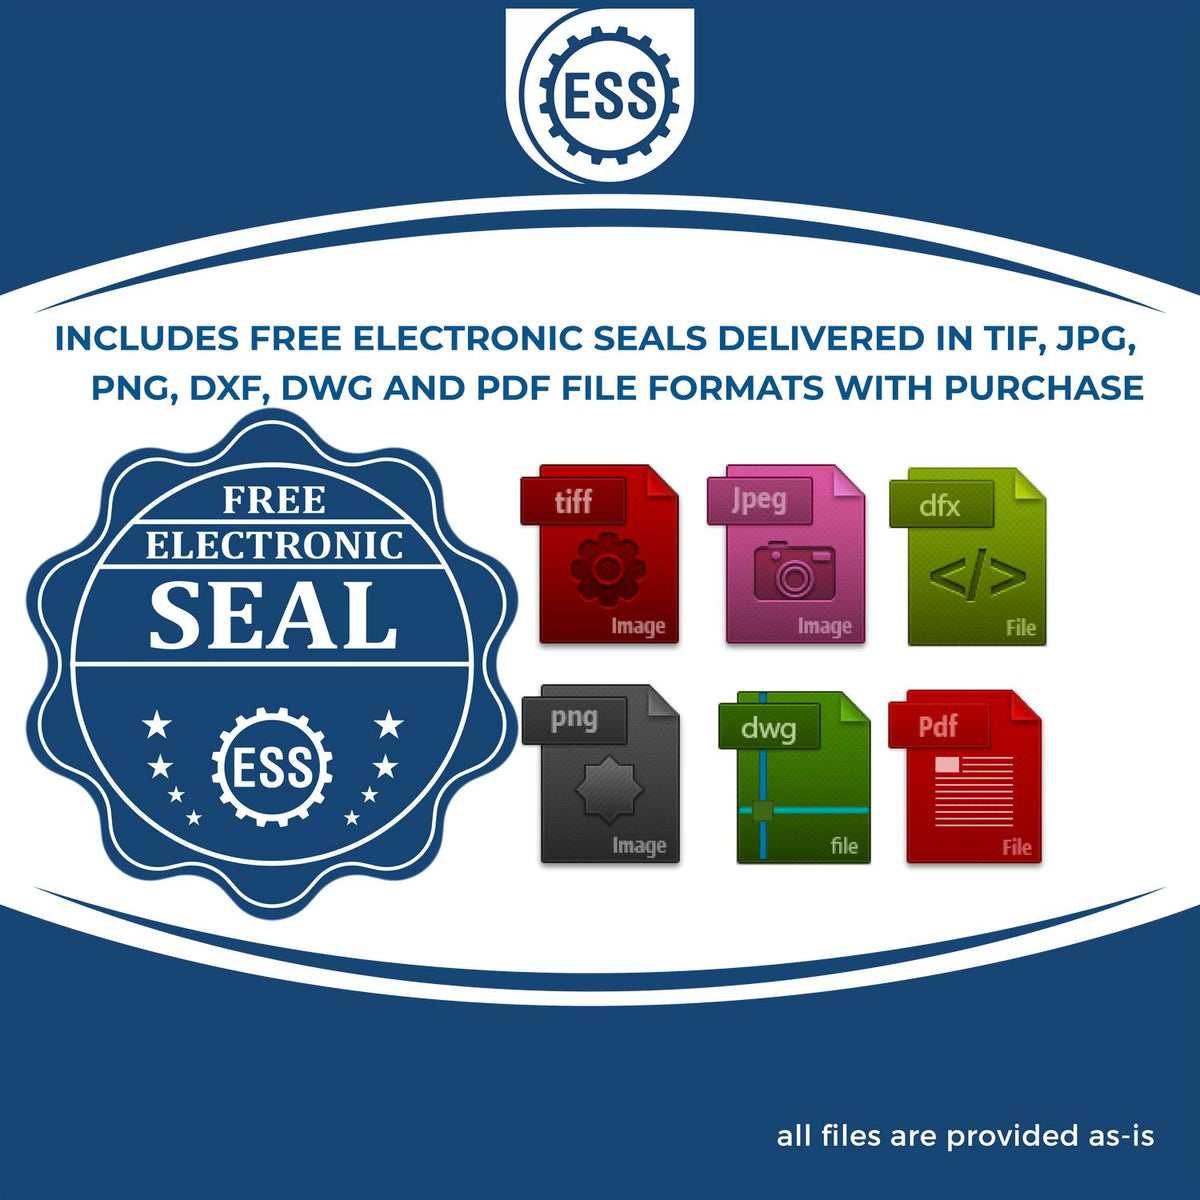 An infographic for the free electronic seal for the Gift Alaska Engineer Seal illustrating the different file type icons such as DXF, DWG, TIF, JPG and PNG.